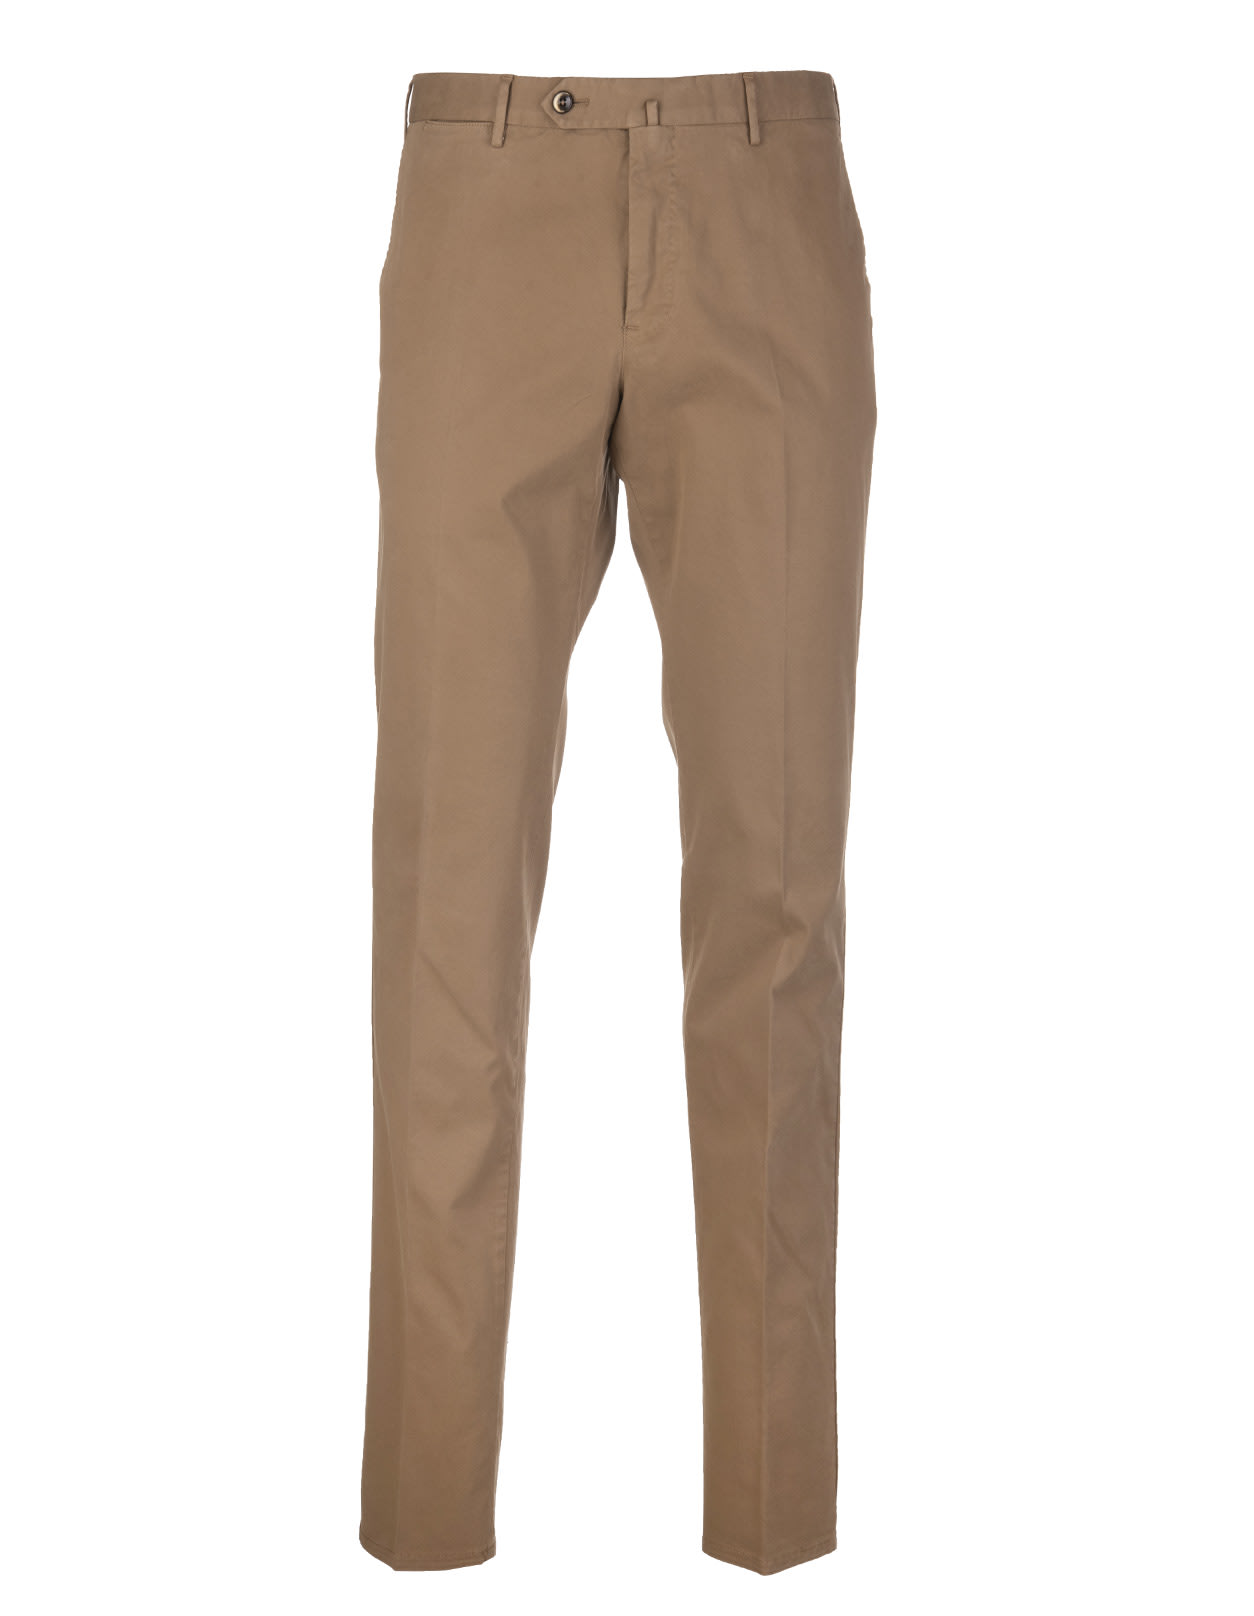 PT01 Man Camel Slim Fit Chino Trousers